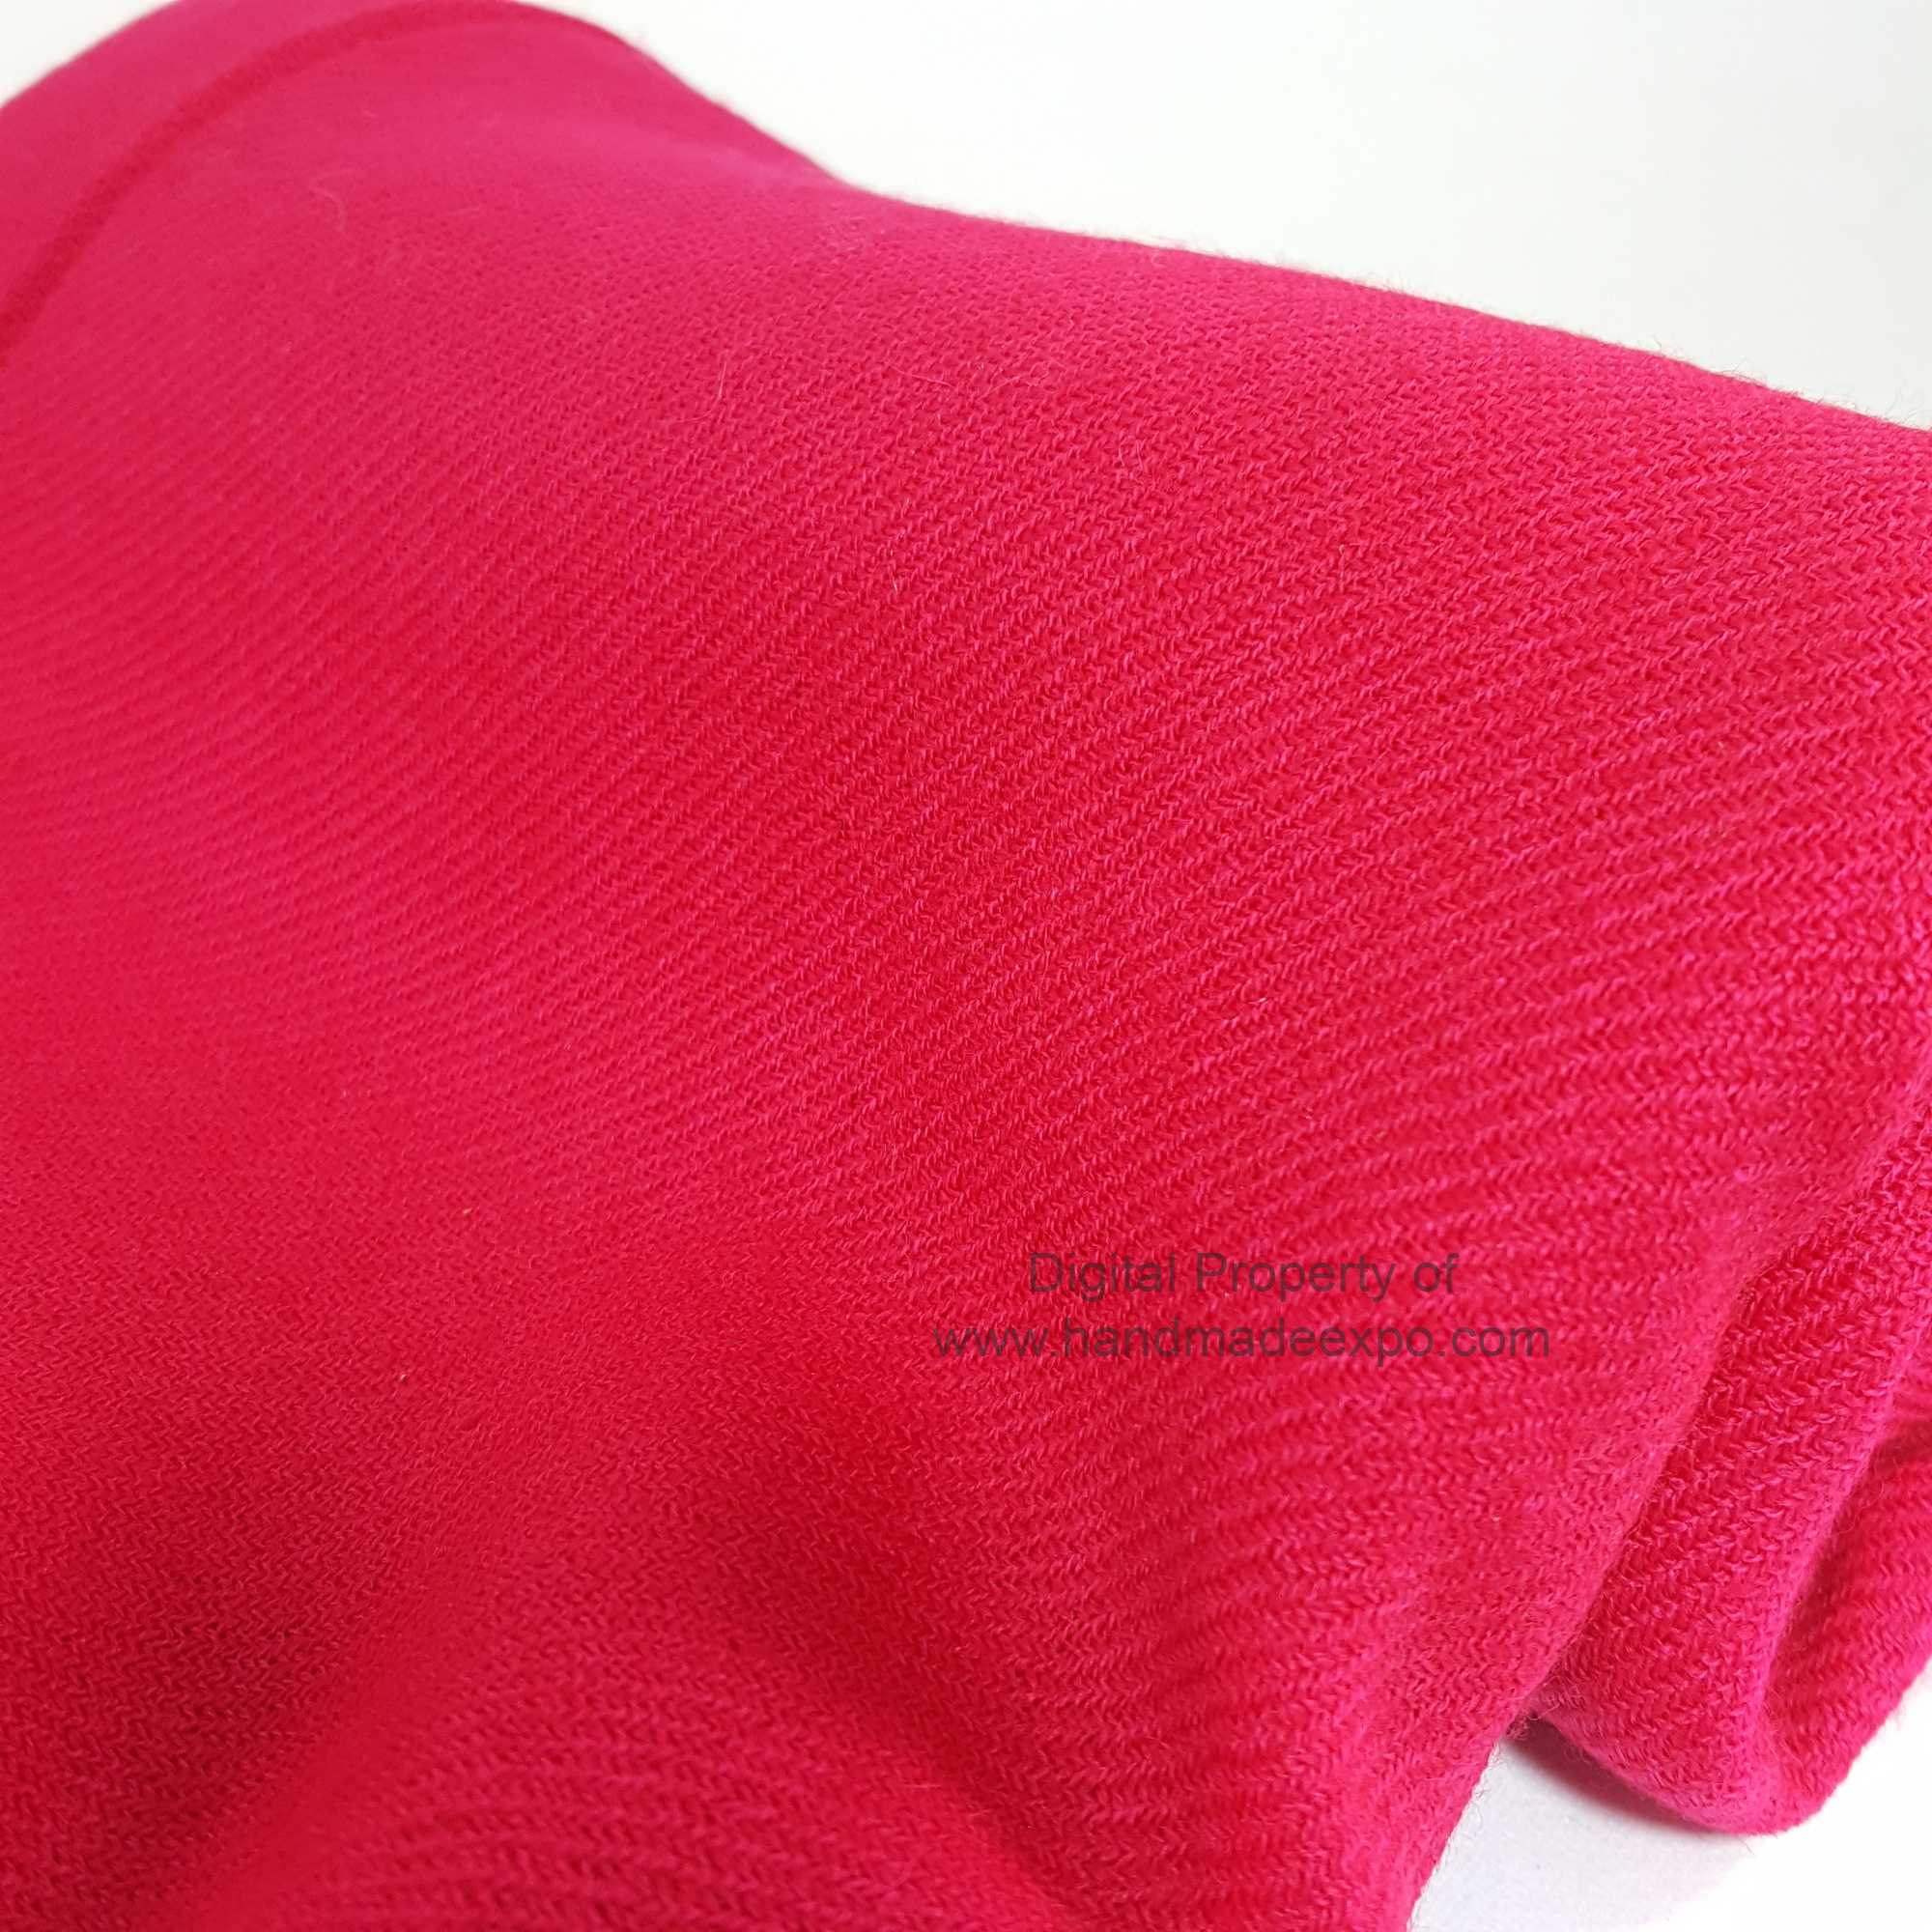 Pashmina Shawl, Nepali Handmade Shawl, In Four Ply Wool, Color Dye red Color